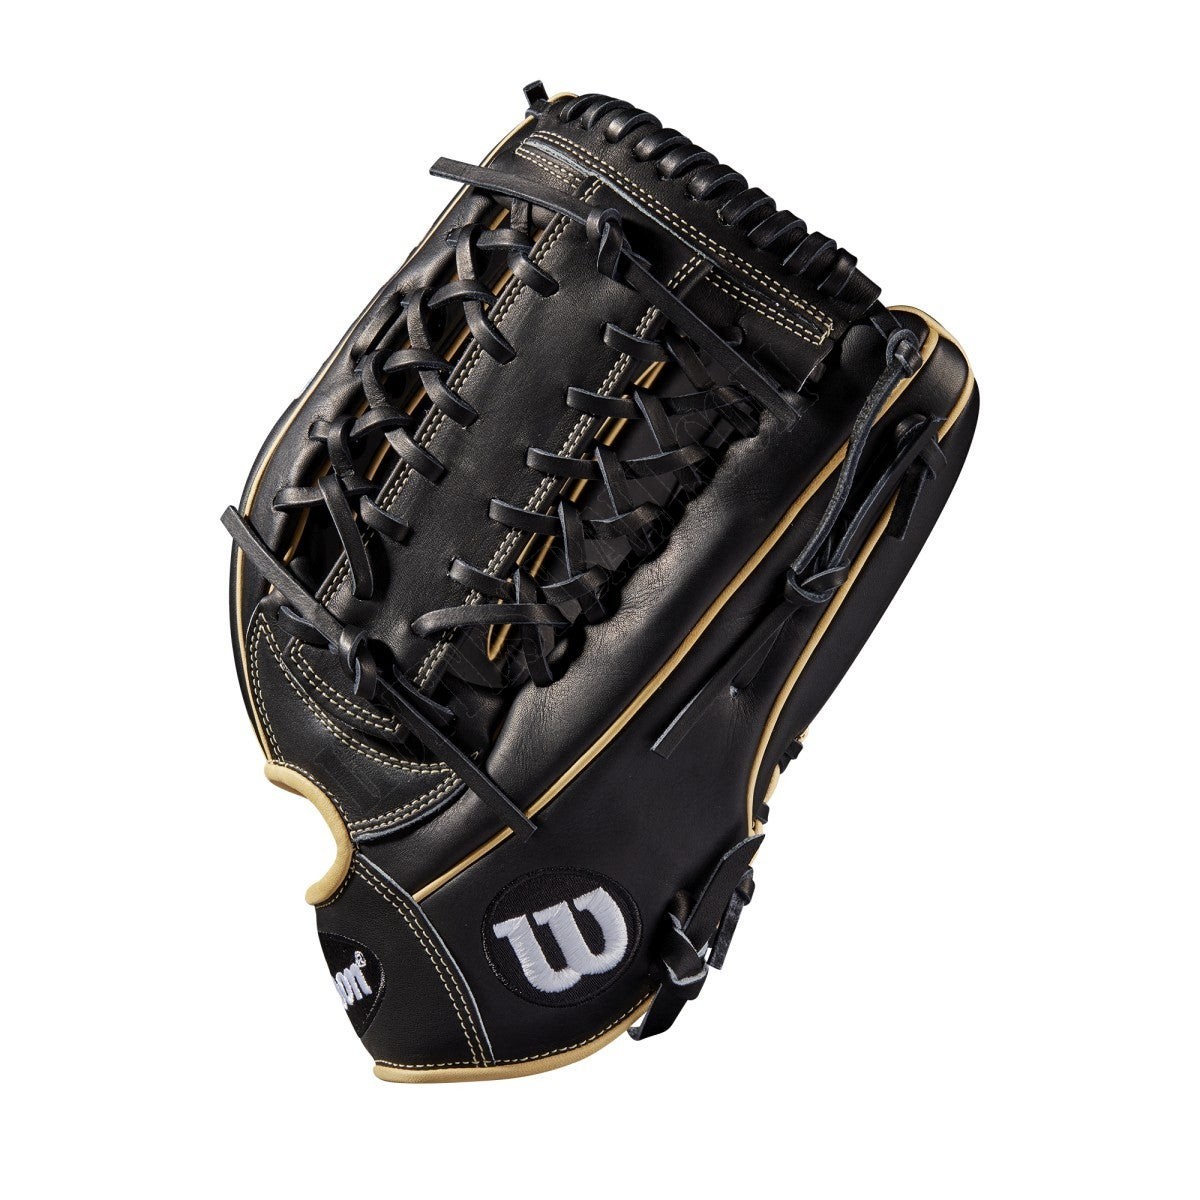 2019 A2000 KP92 12.5" Outfield Baseball Glove ● Wilson Promotions - -6